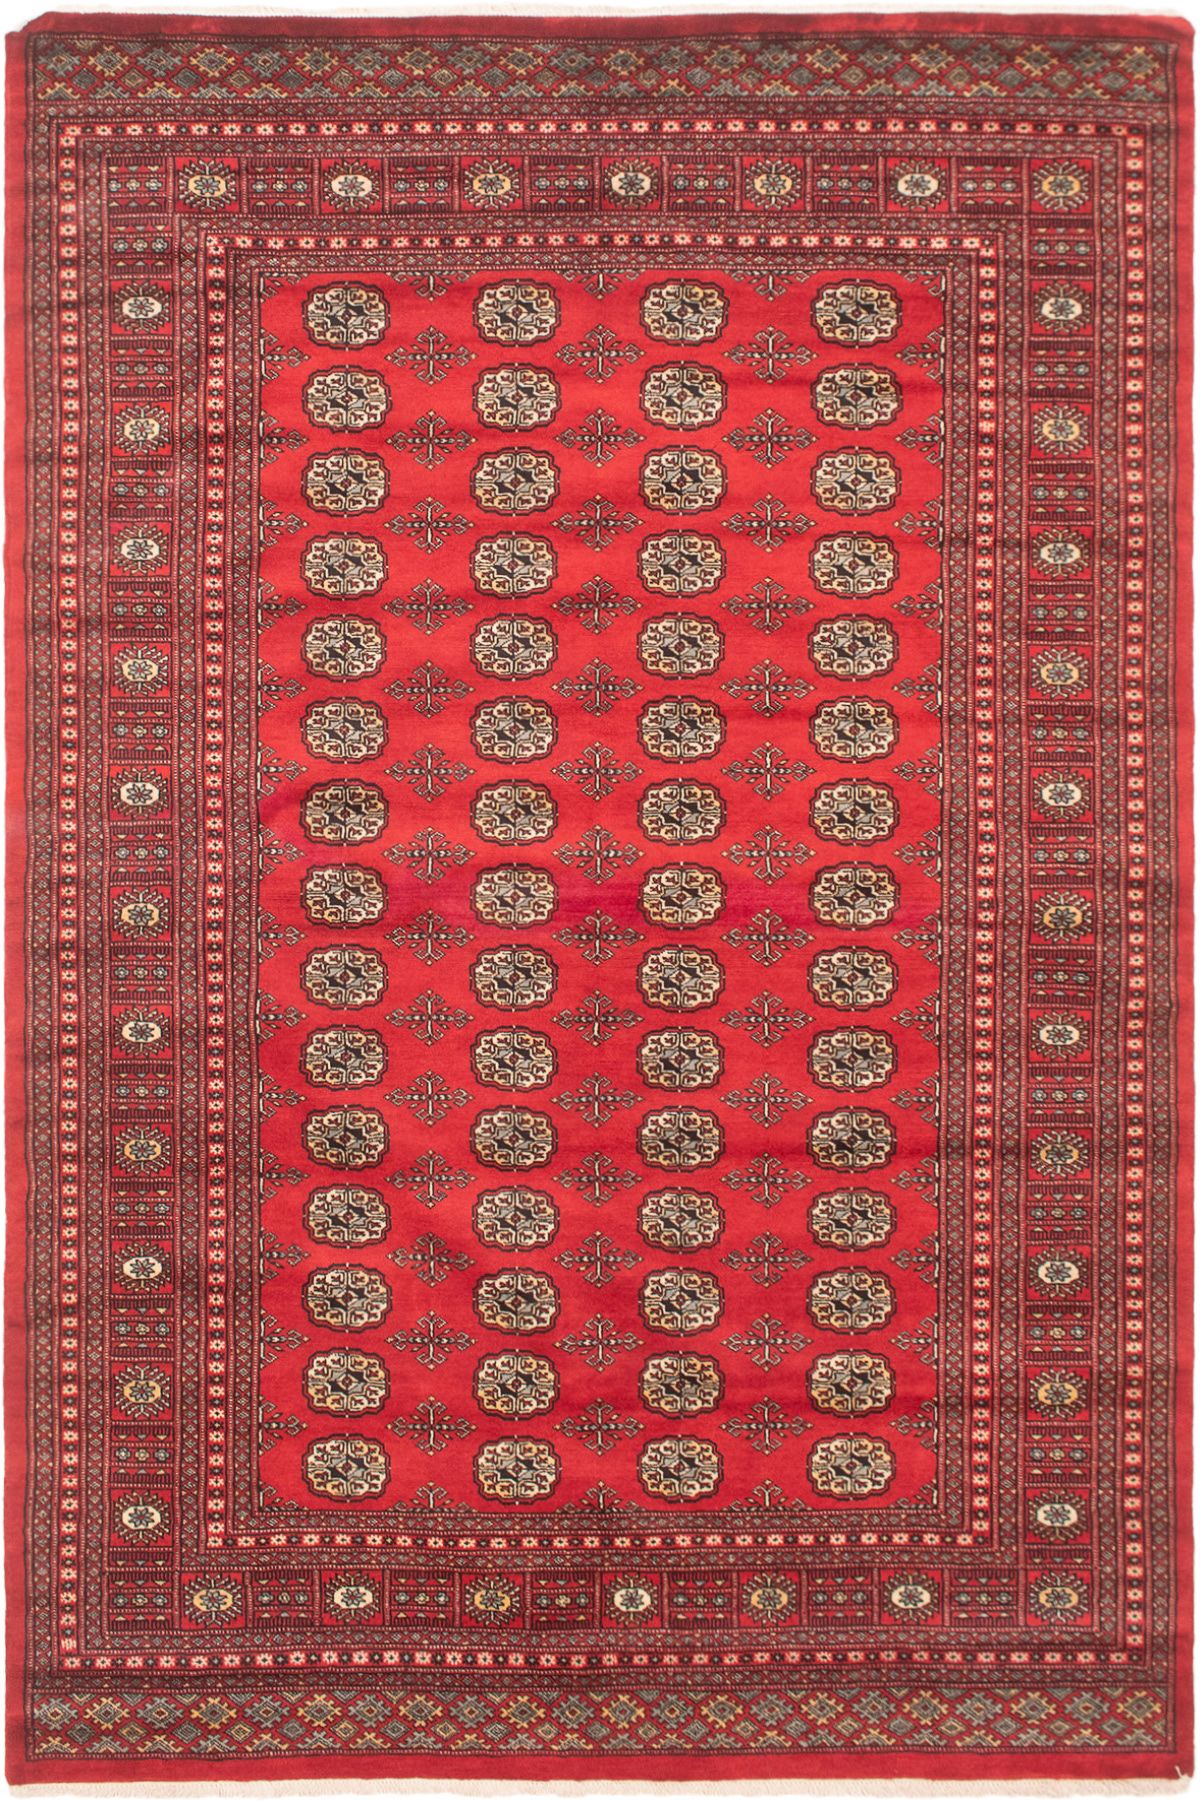 Hand-knotted Finest Peshawar Bokhara Red Wool Rug 6'1" x 9'1"  Size: 6'1" x 9'1"  